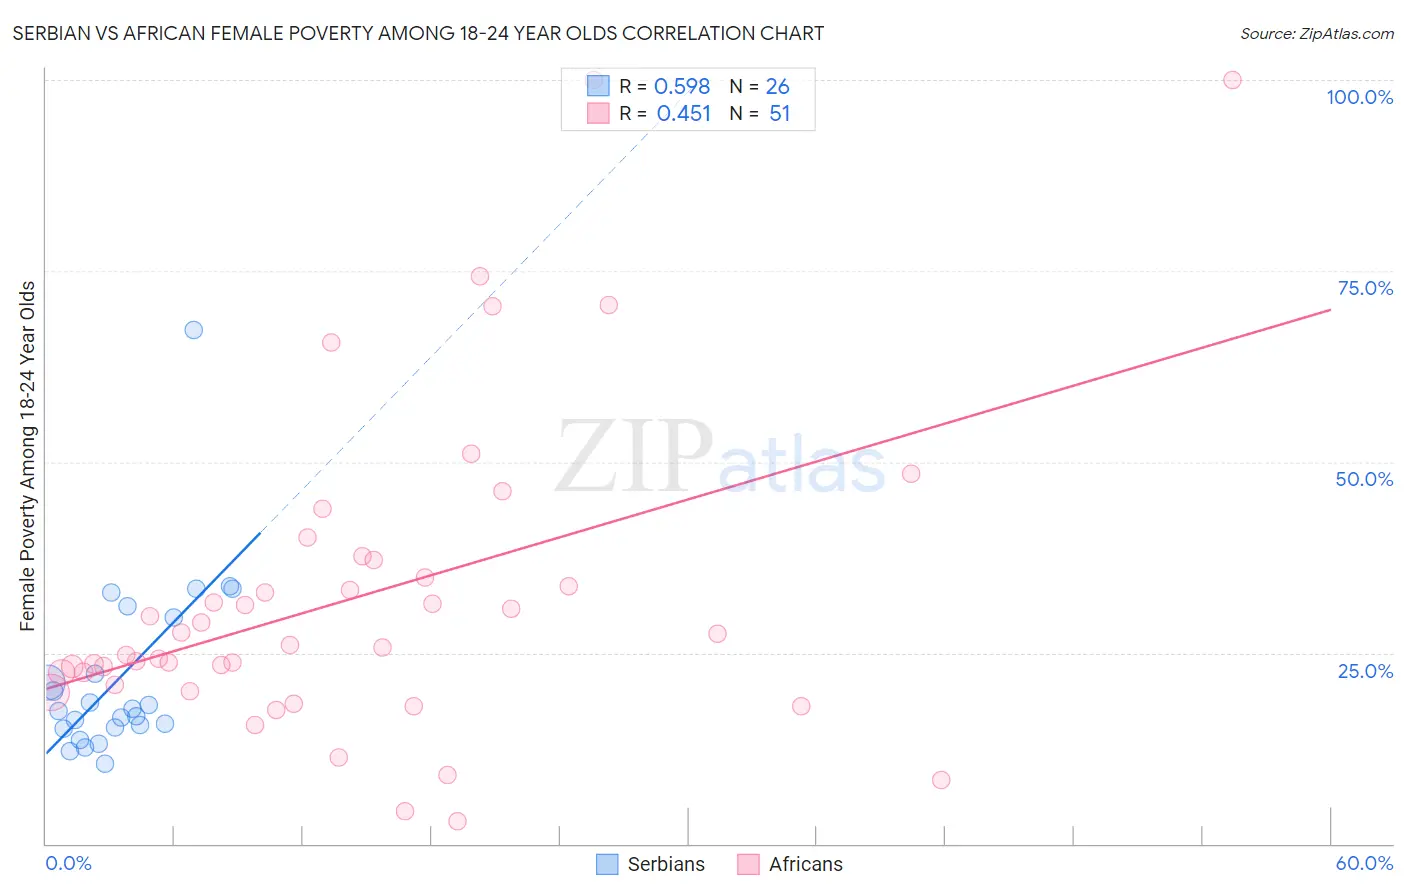 Serbian vs African Female Poverty Among 18-24 Year Olds